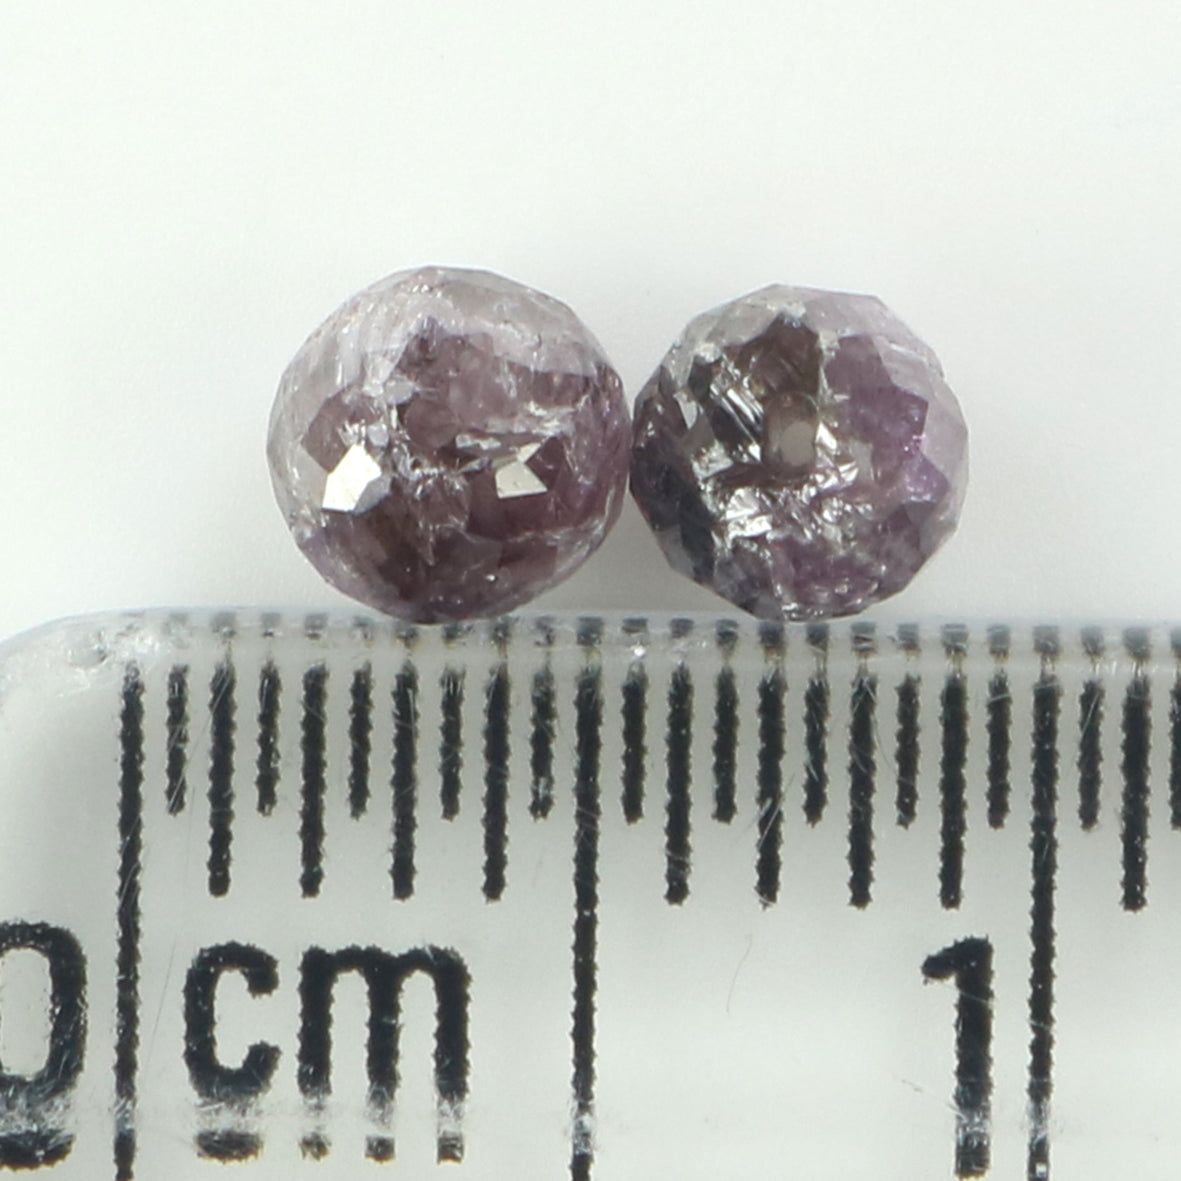 0.88 CT Faceted Bead Diamond, Natural Loose Diamond, Pink Bead Diamond, Faceted Diamond Bead, Beads Loose Diamond, Beads For Necklace L9898